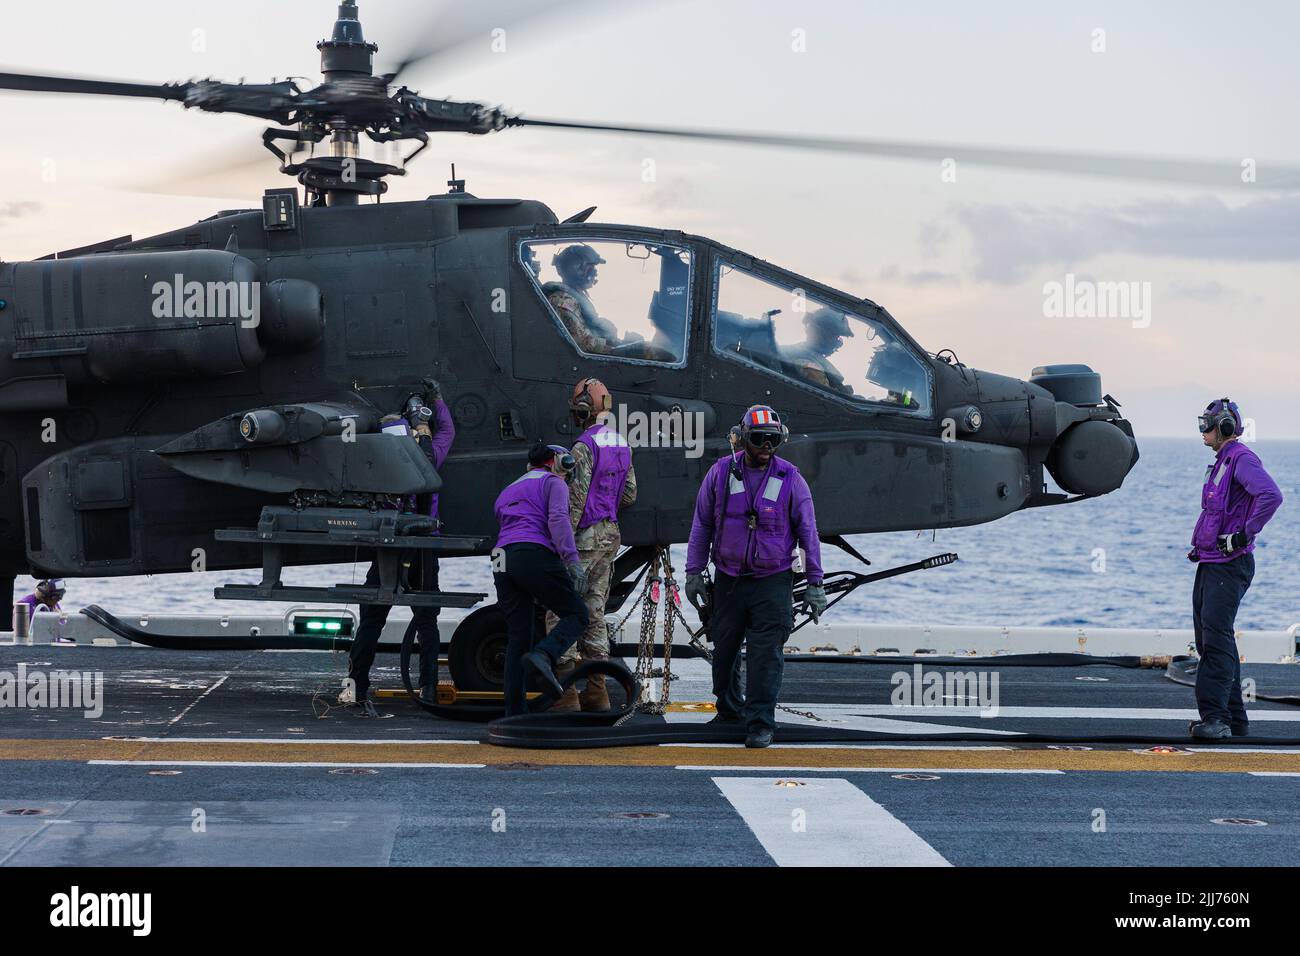 220715-A-JW340-1082   PACIFIC OCEAN (July 15, 2022) An AH-64D Apache helicopter, attached to the 25th Combat Aviation Brigade, completes deck landing qualification (DLQ) training aboard Wasp-class amphibious assault ship USS Essex (LHD 2) during Rim of the Pacific (RIMPAC) 2022. Twenty-six nations, 38 ships, three submarines, more than 170 aircraft and 25,000 personnel are participating in RIMPAC from June 29 to Aug. 4 in and around the Hawaiian Islands and Southern California. The world’s largest international maritime exercise, RIMPAC provides a unique training opportunity while fostering an Stock Photo